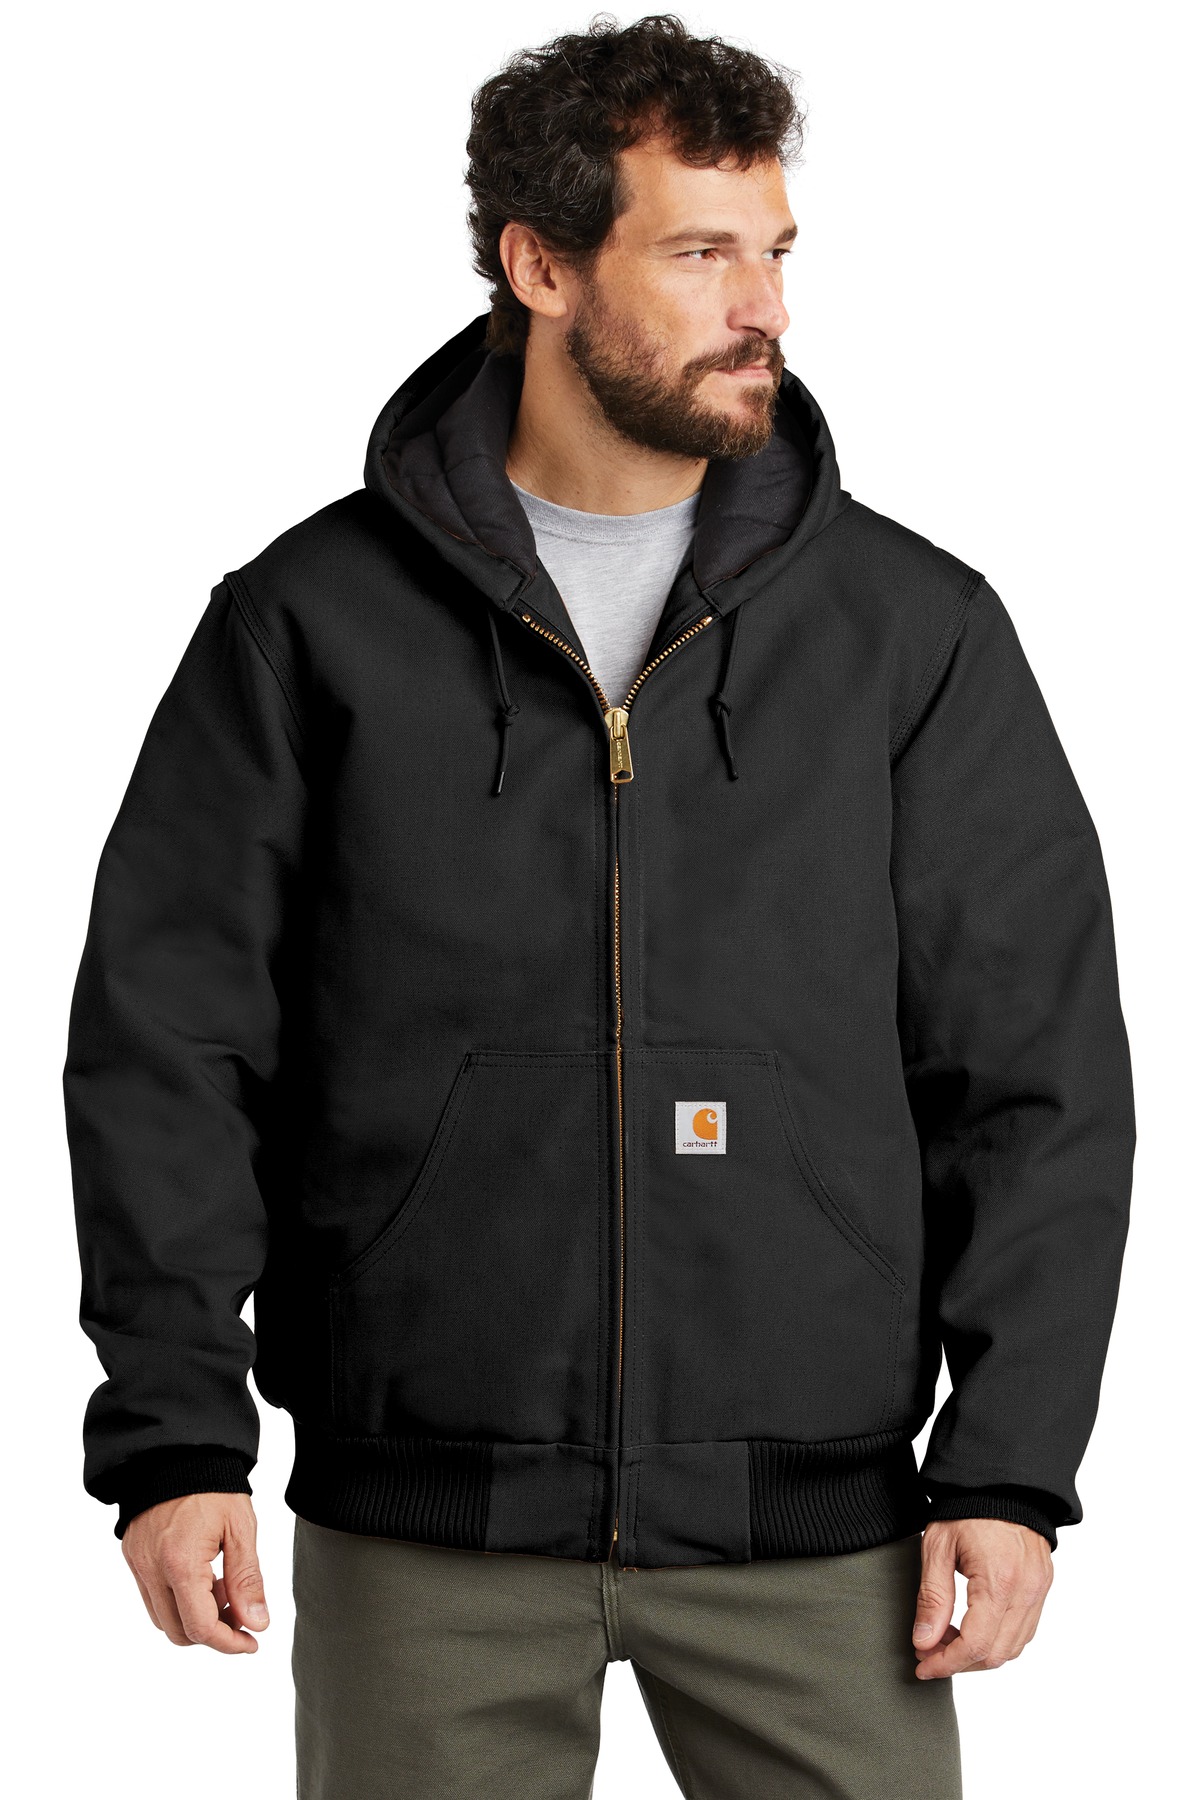 Carhartt Hospitality Outerwear &Workwear ® Quilted-Flannel-Lined Duck Active Jac.-Carhartt